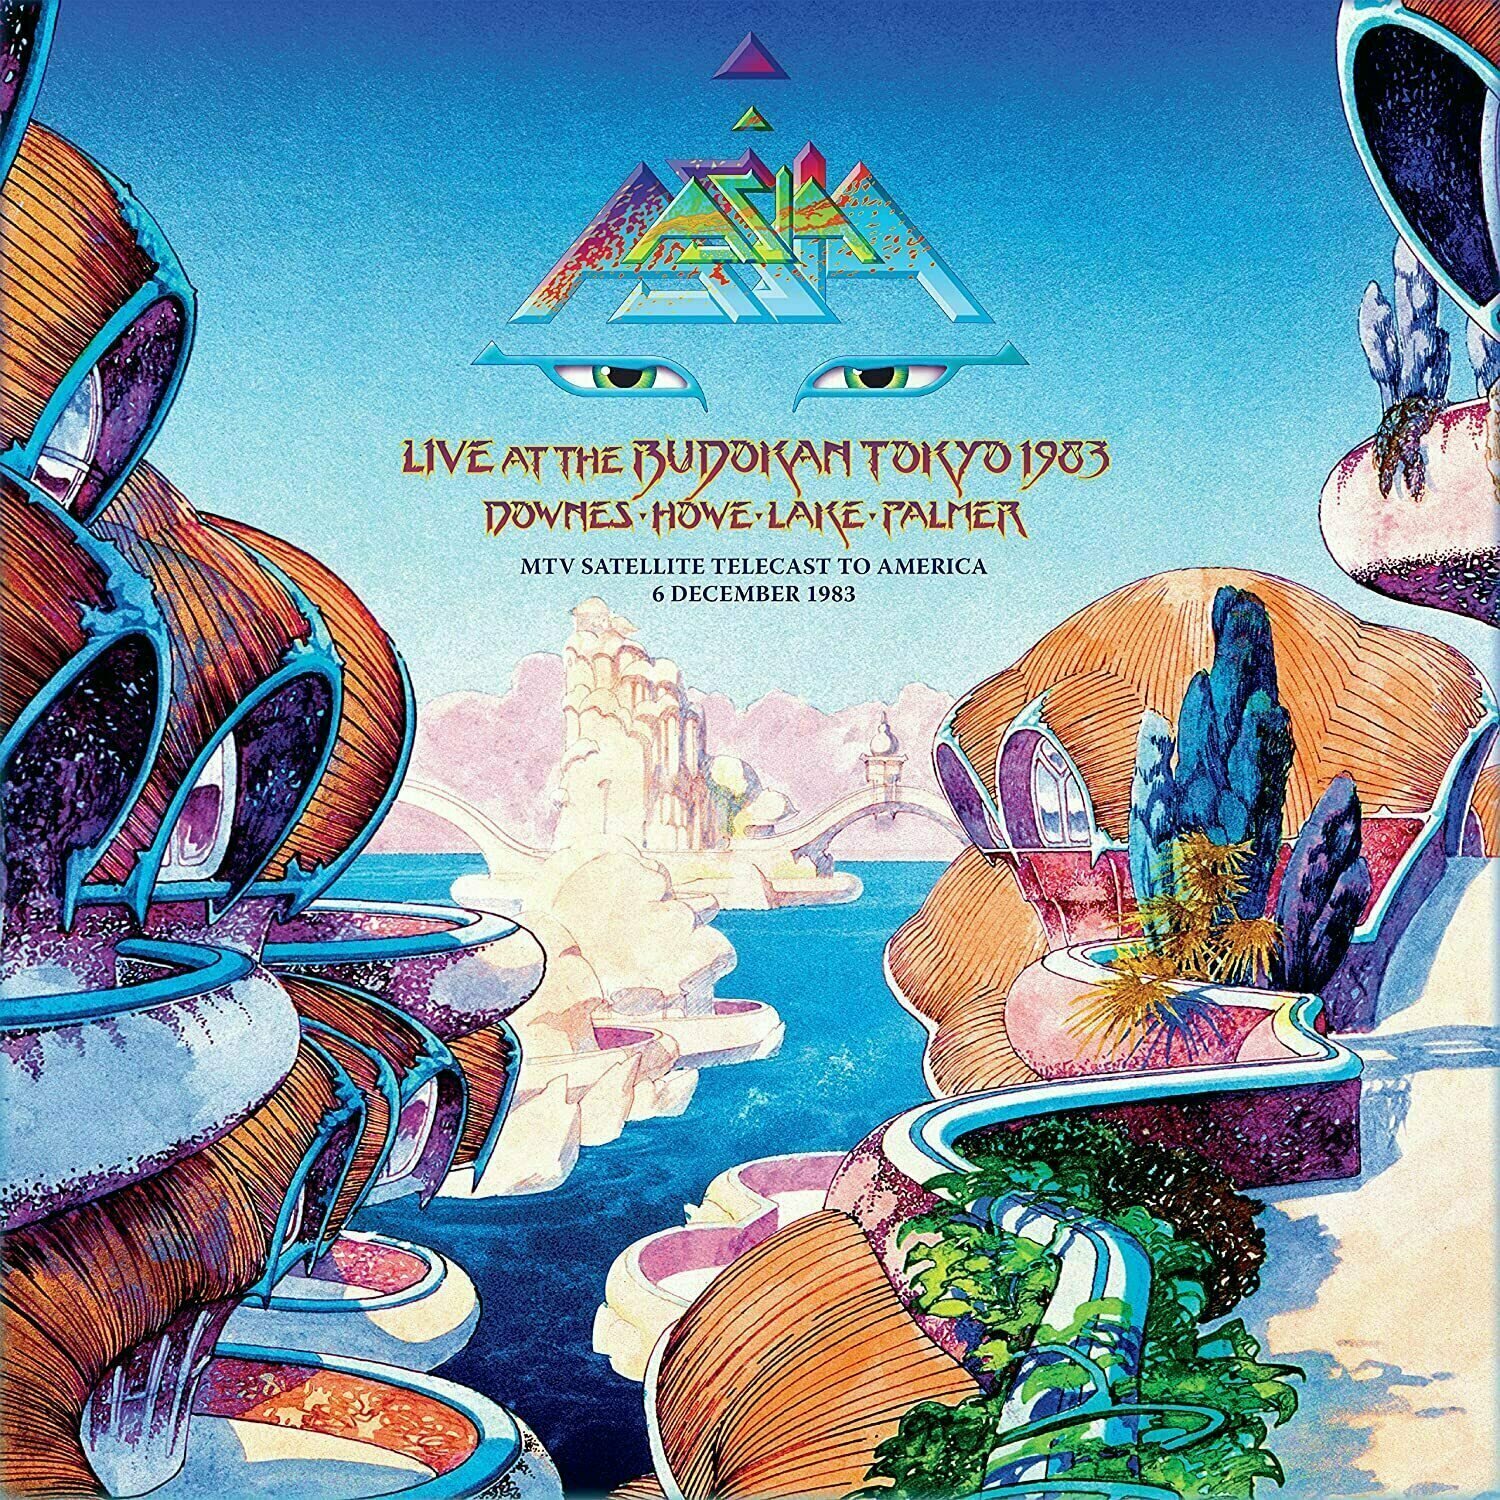 Levně Asia - Asia In Asia - Live At The Budokan, Tokyo, 1983 Deluxe (2 LP + 2 CD + Blu-ray)